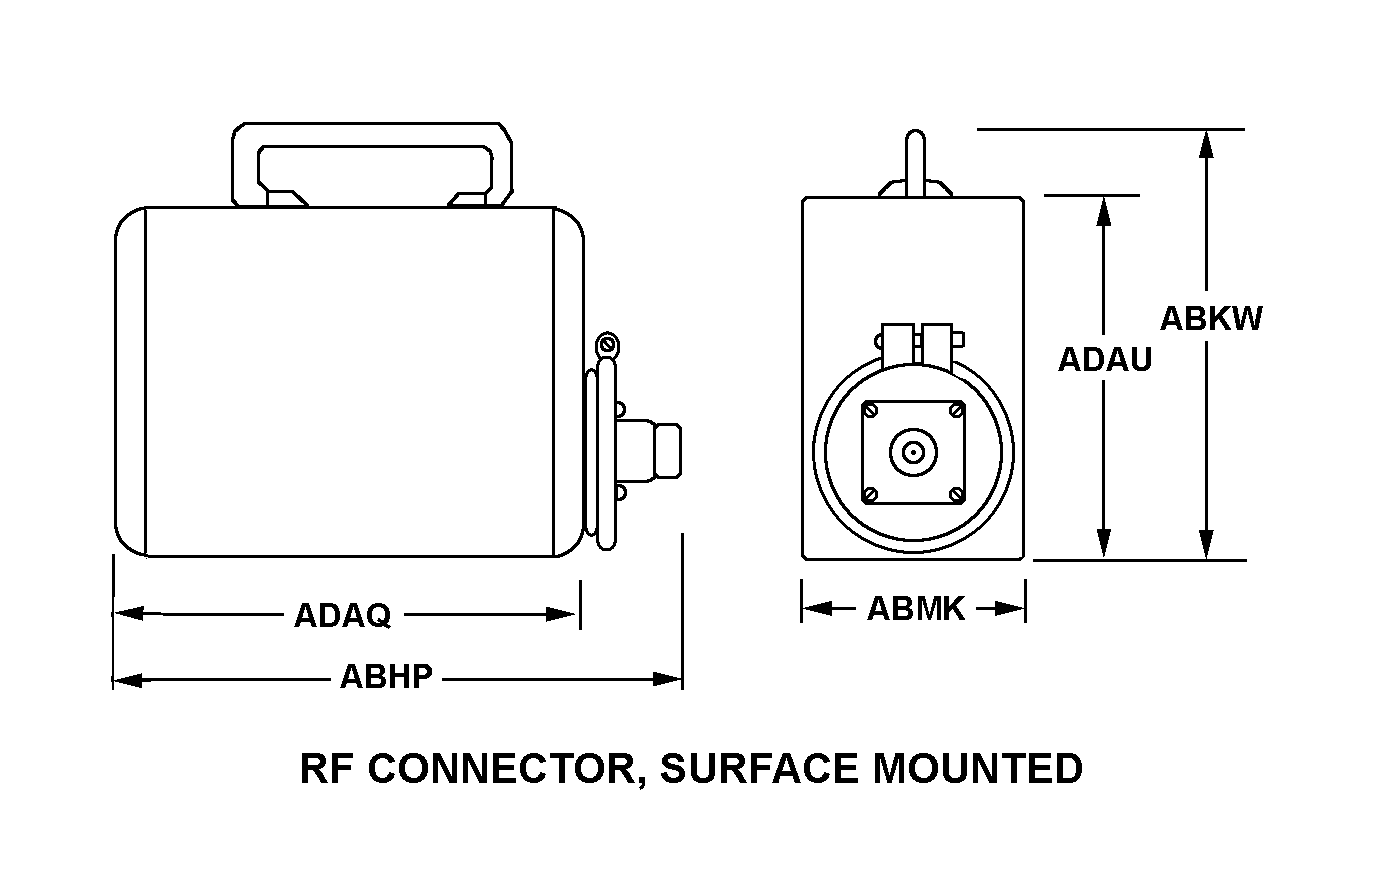 RF CONNECTOR, SURFACE MOUNTED style nsn 5985-00-578-5547